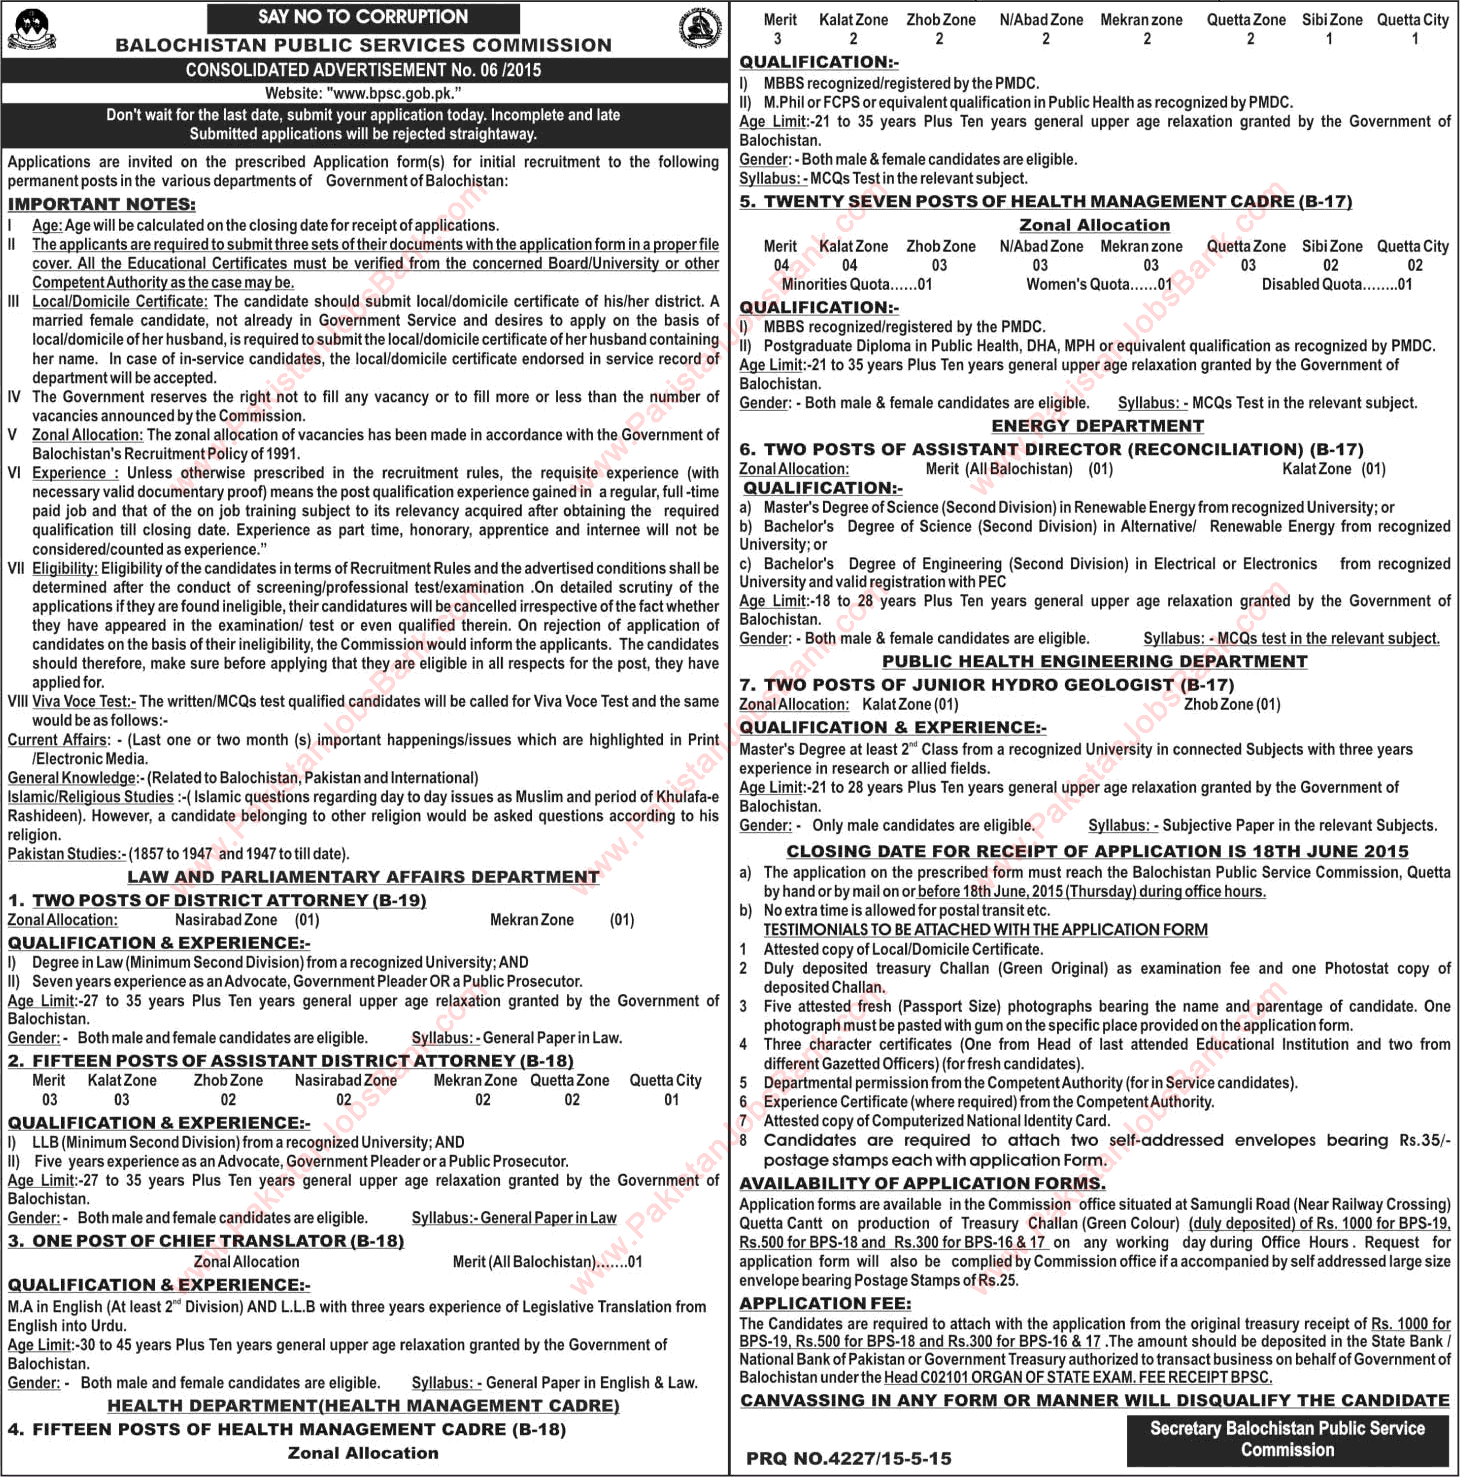 Balochistan Public Service Commission Jobs May 2015 Consolidated Advertisement No. 06/2015 (6/2015) Latest Quetta